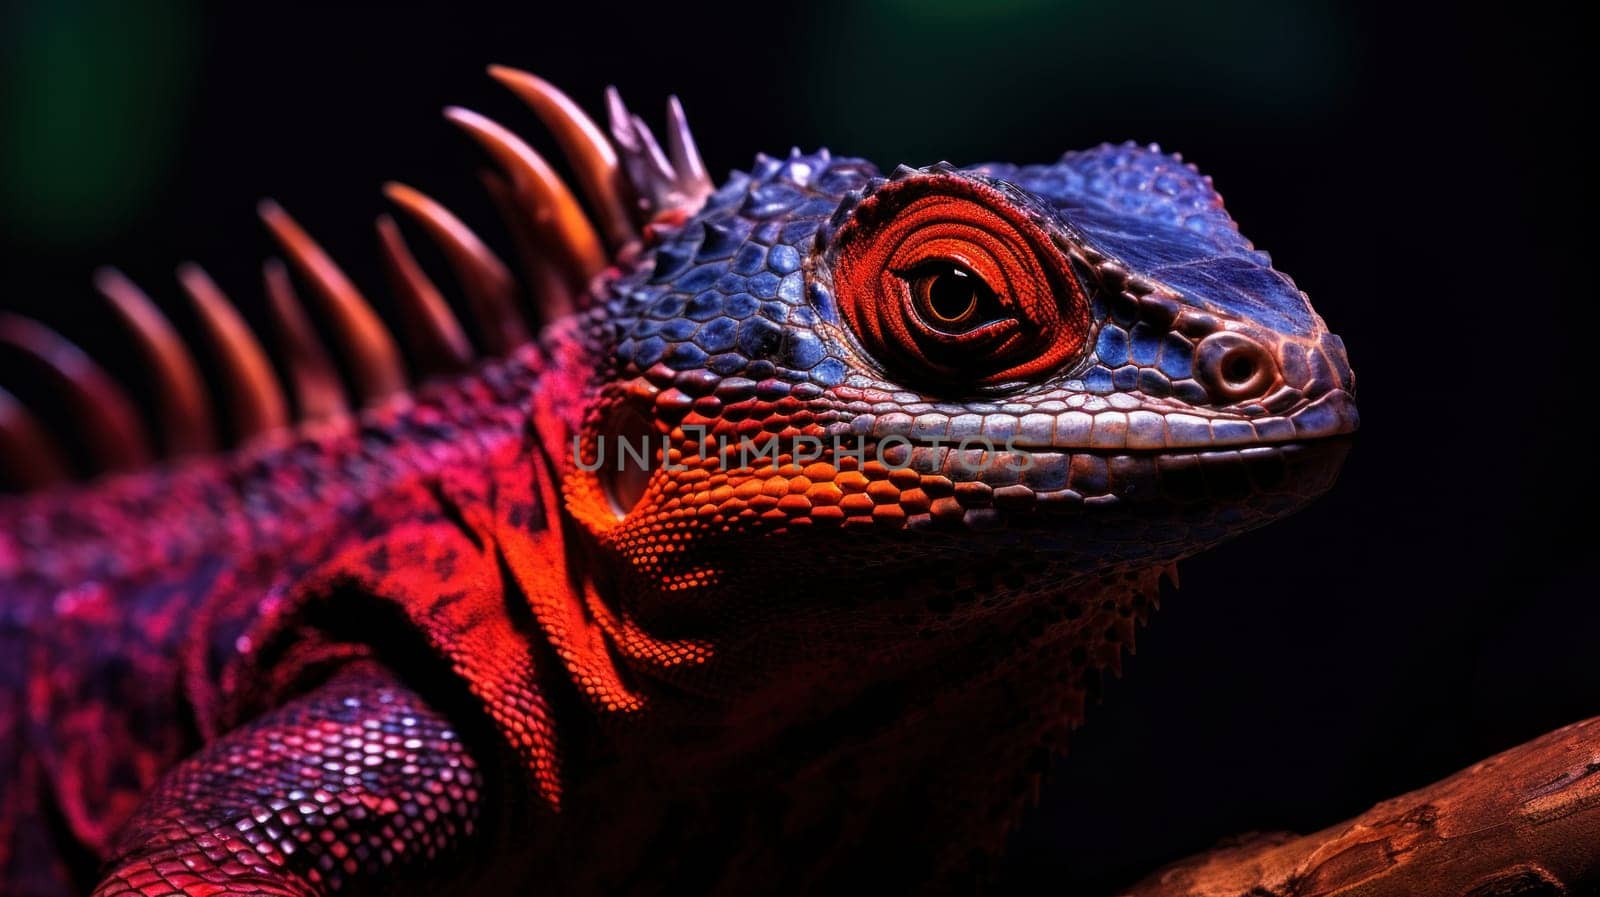 A close up of a colorful lizard with bright red eyes